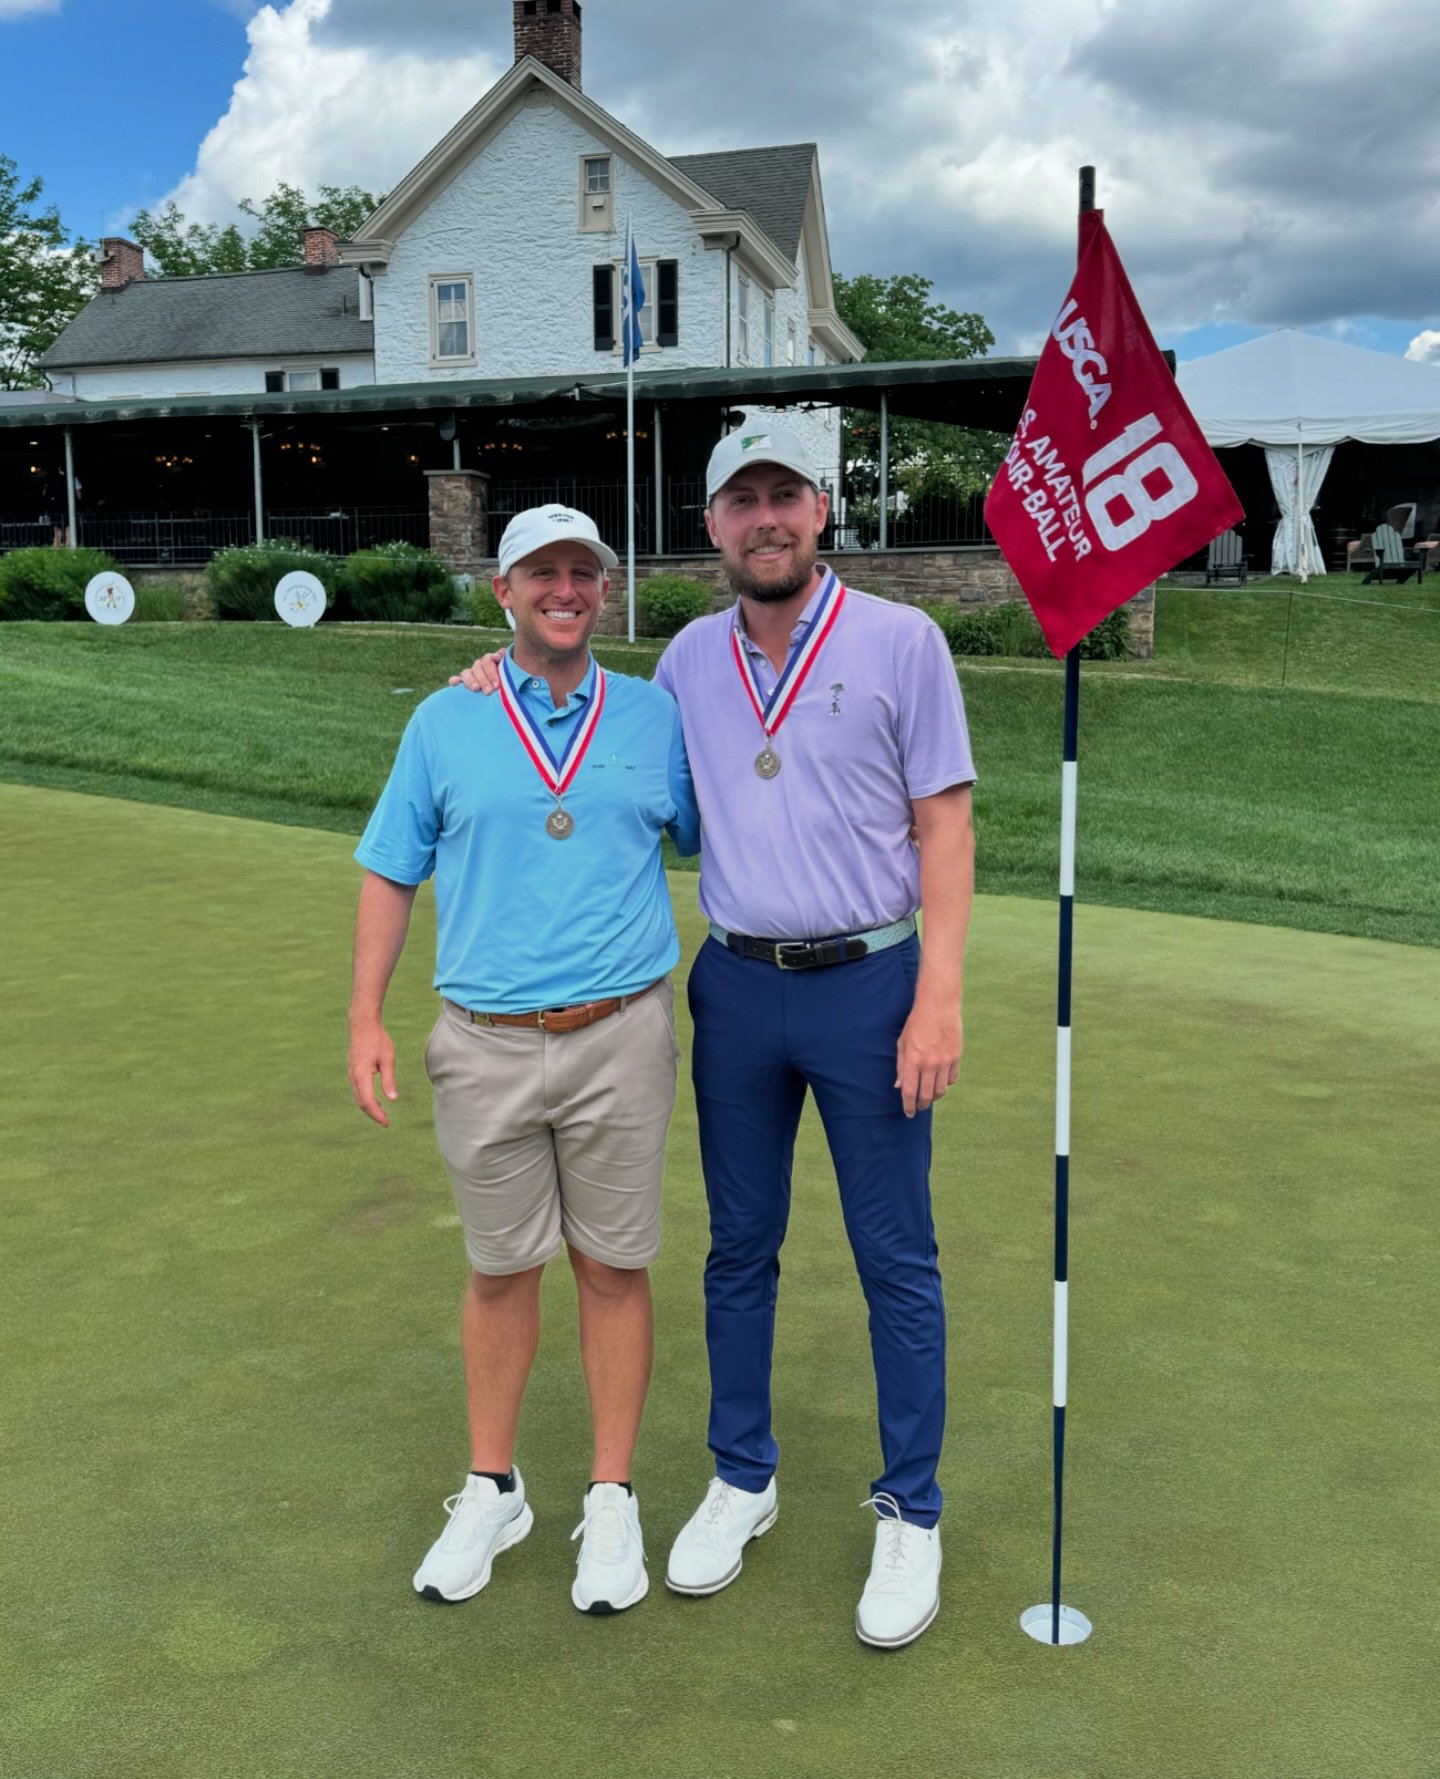 A week I&rsquo;ll never forget and memories to last a lifetime @pcc1854 🥹

It felt like a dream and I can&rsquo;t believe it&rsquo;s over. 

Making the semis in the @usga #usfourballchampionship with @willywonka93 was surreal and I want to thank EVE